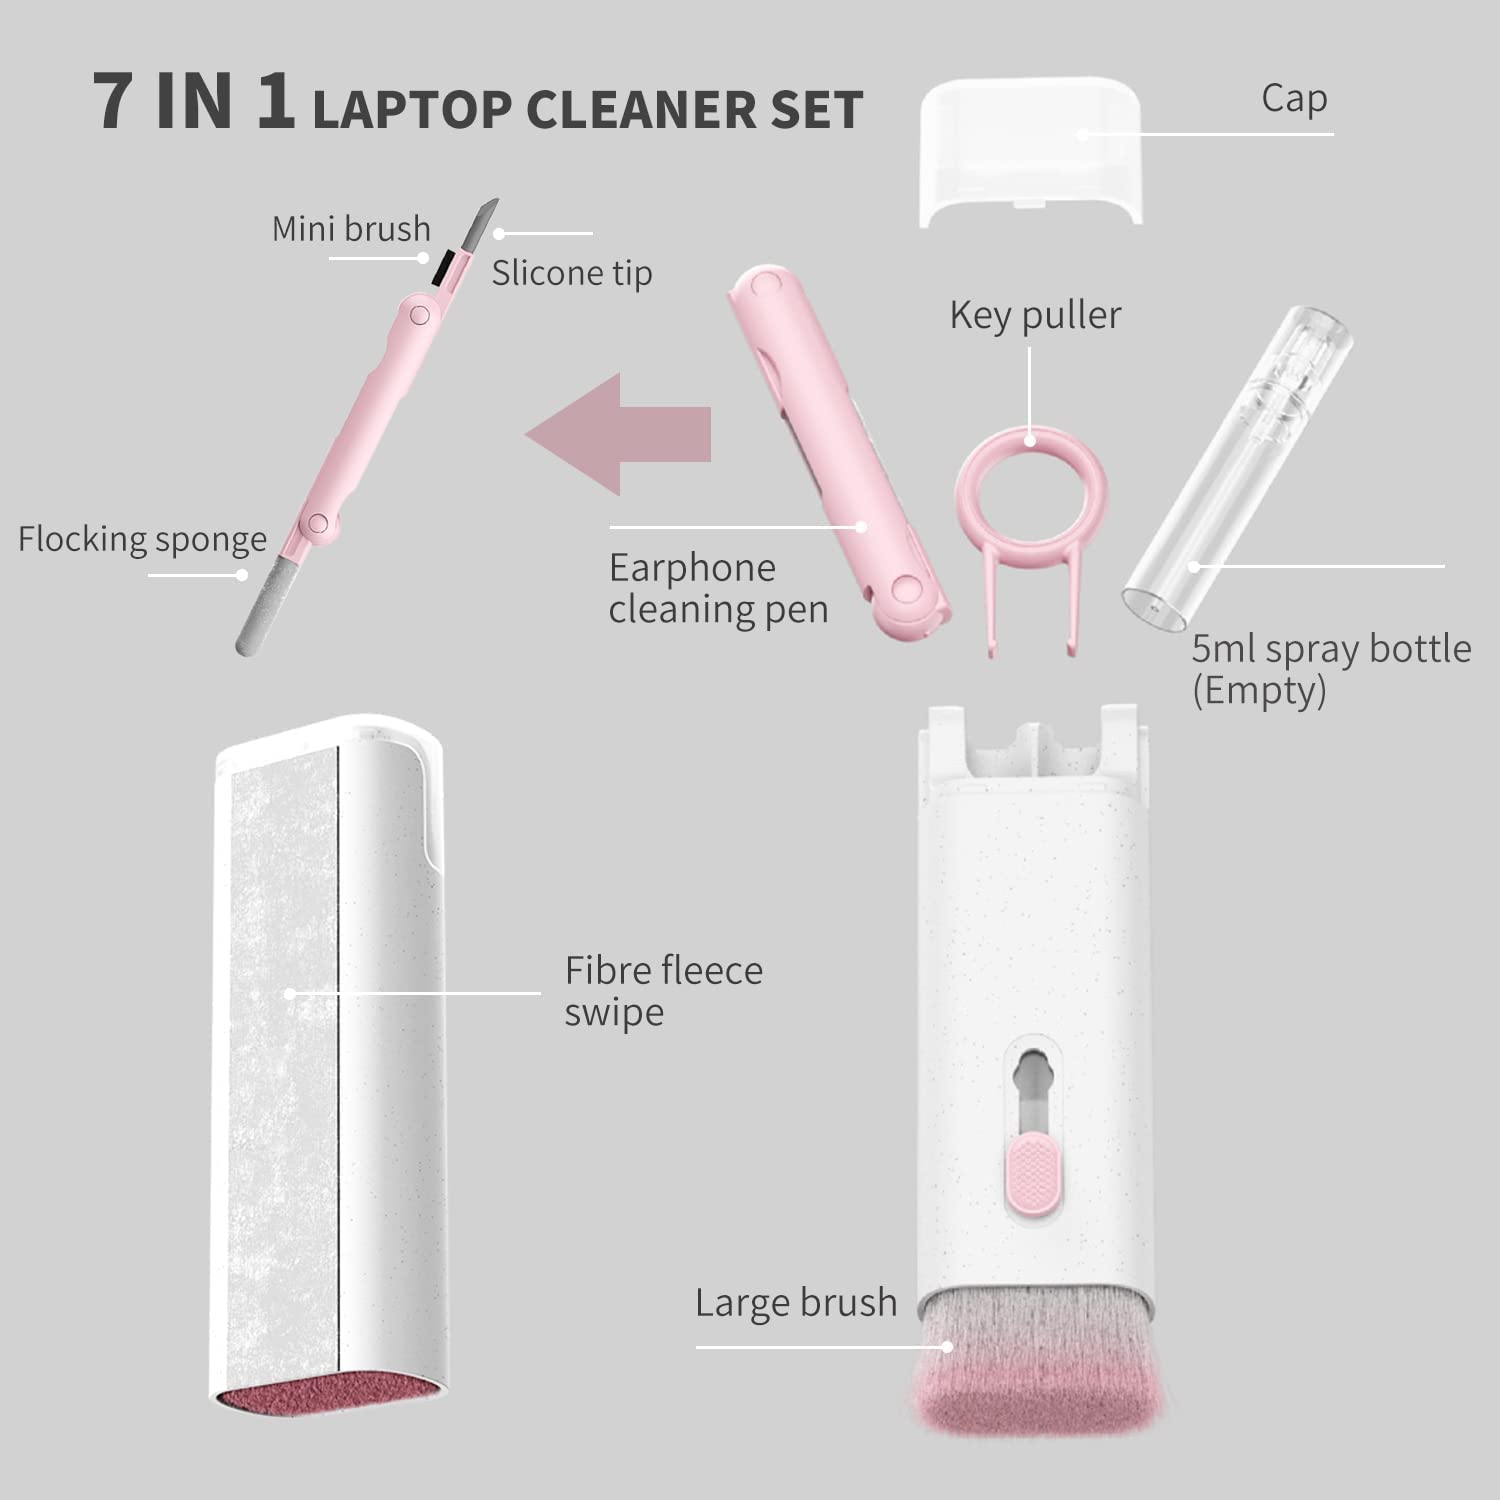 Multifunctional Cleaning Brush | 7-in-1 Keyboard Cleaning Kit